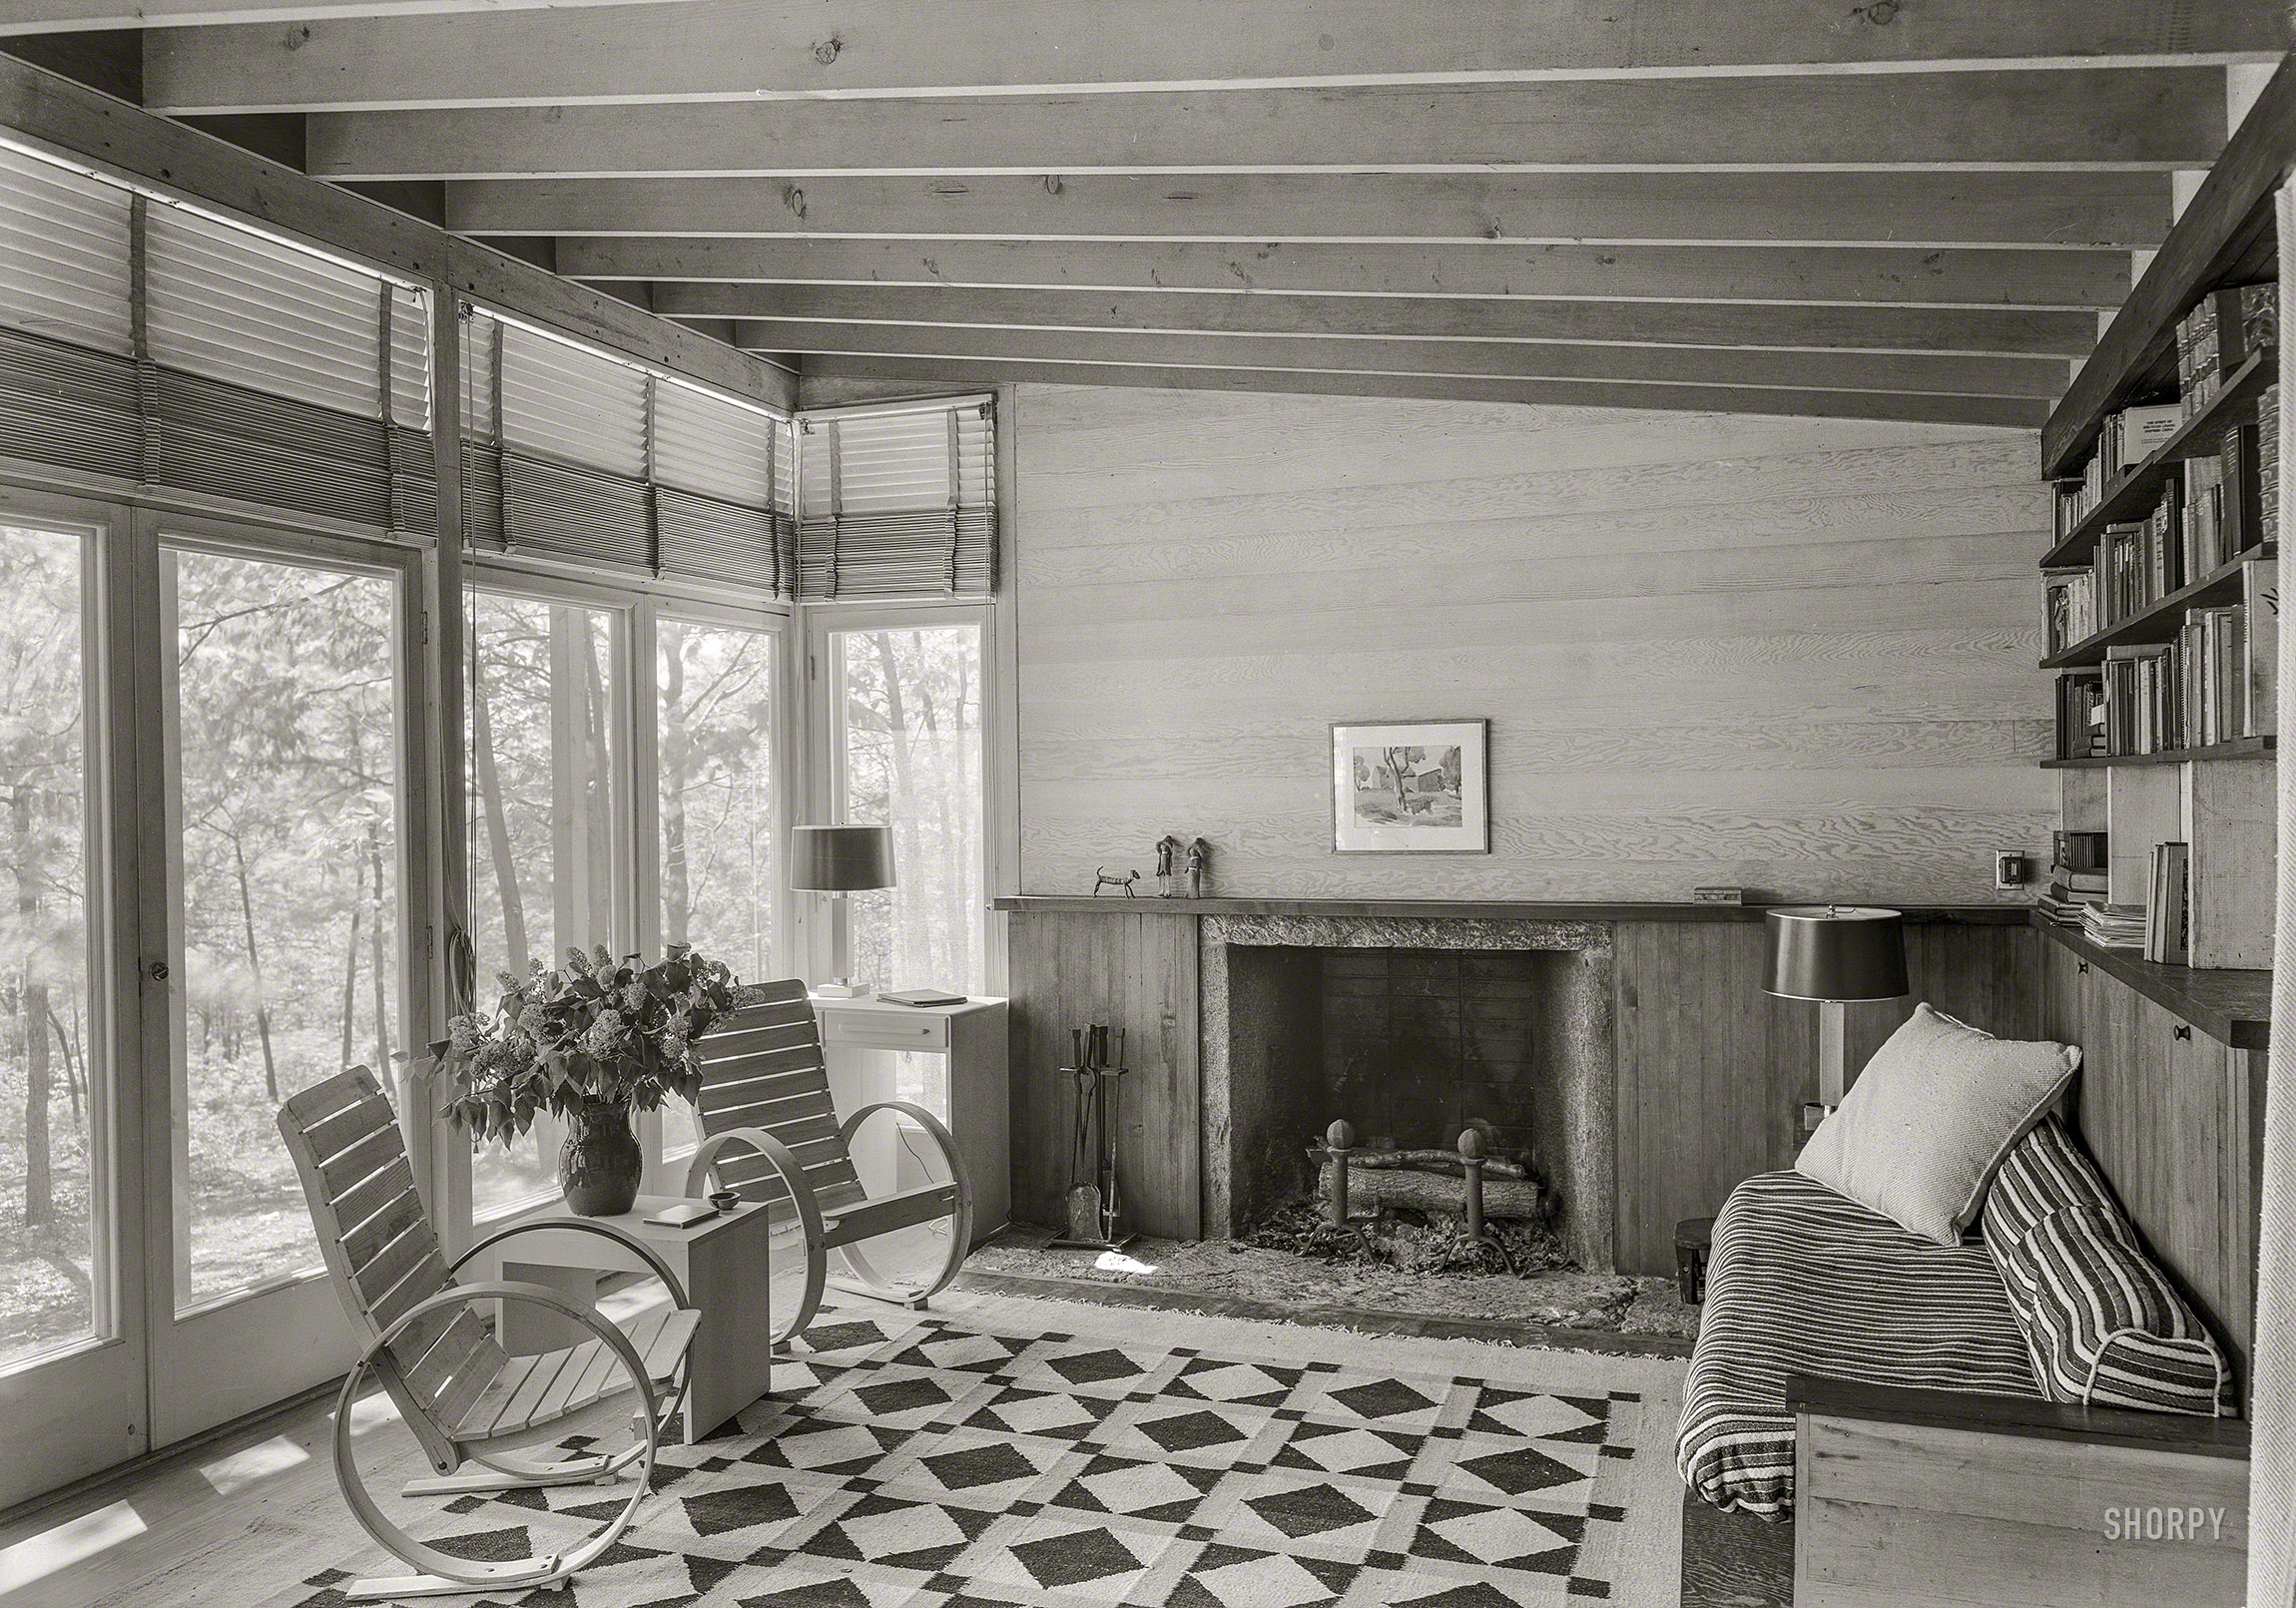 May 30, 1940. "John C.B. Moore residence in Pound Ridge, Westchester County, New York. Living room, to fireplace. Moore & Hutchins, architect." Large-format acetate negative by Gottscho-Schleisner. View full size.